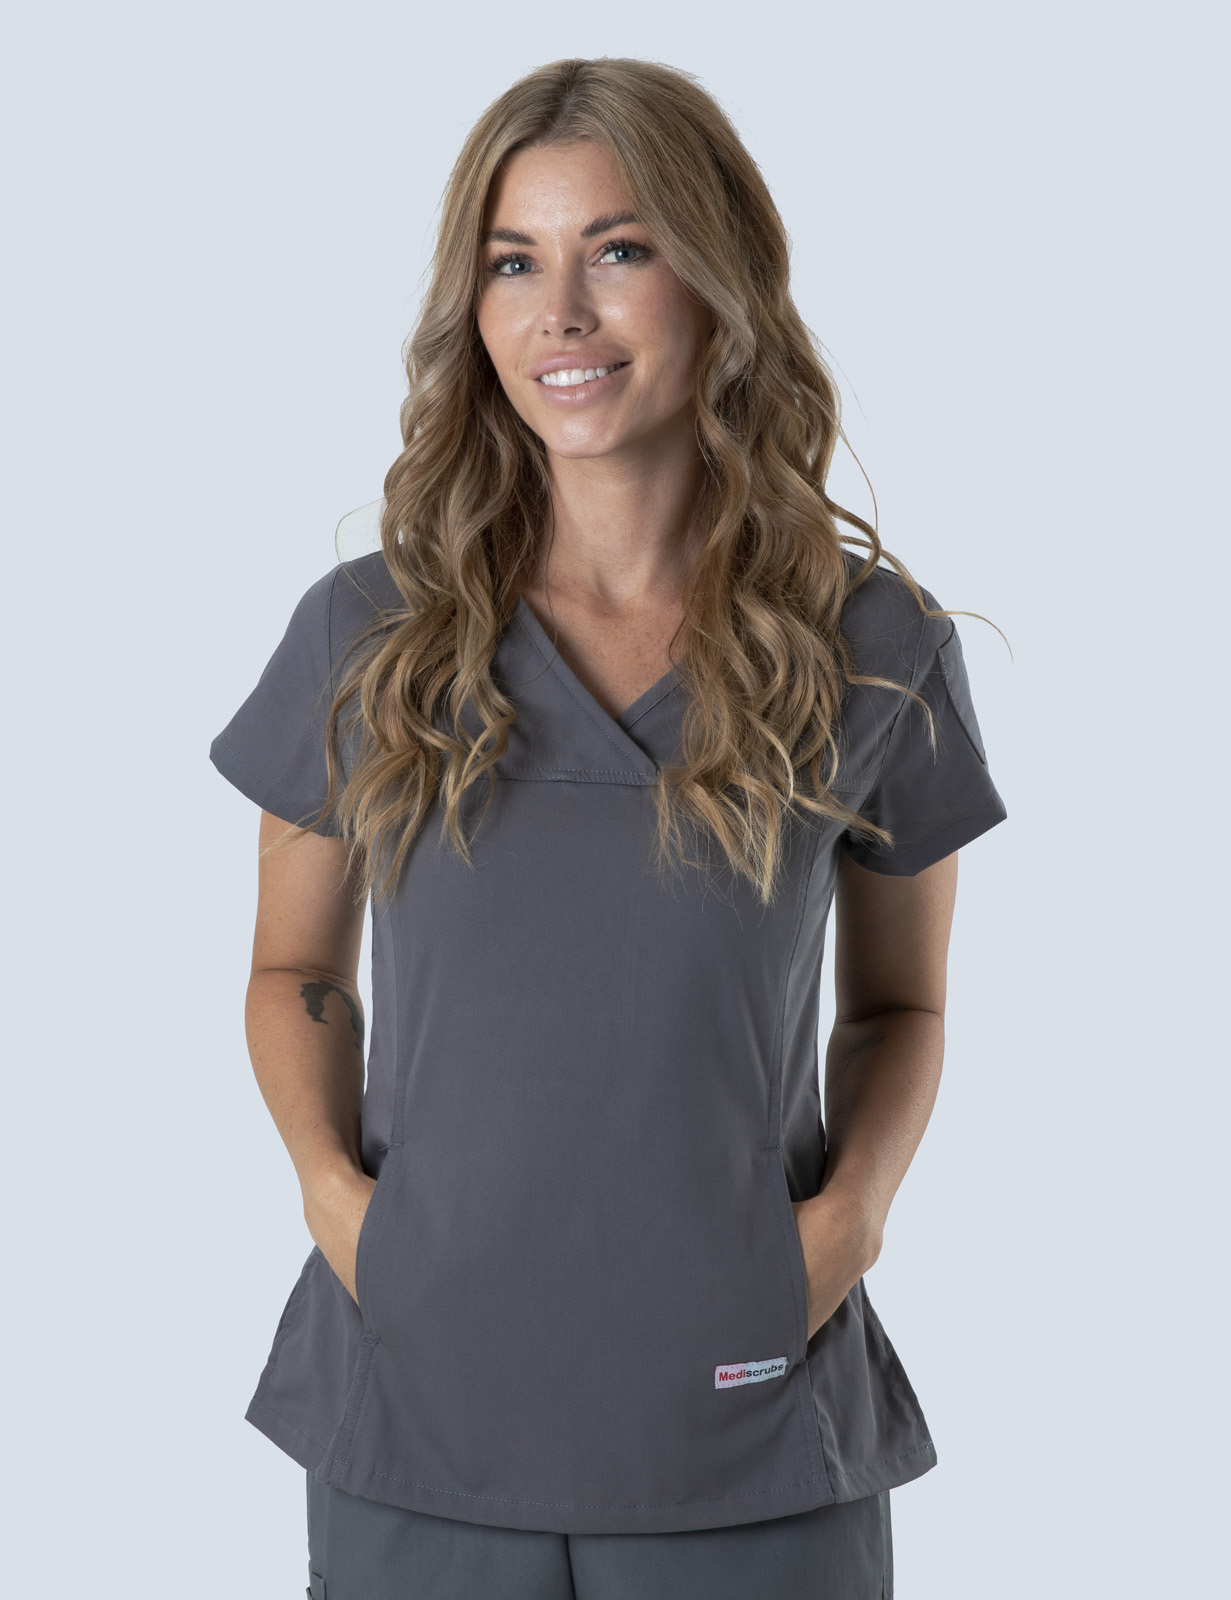 RBWH - Neonatal ICU (Women's Fit Solid Scrub Top and Cargo Pants in Steel Grey incl Logos)